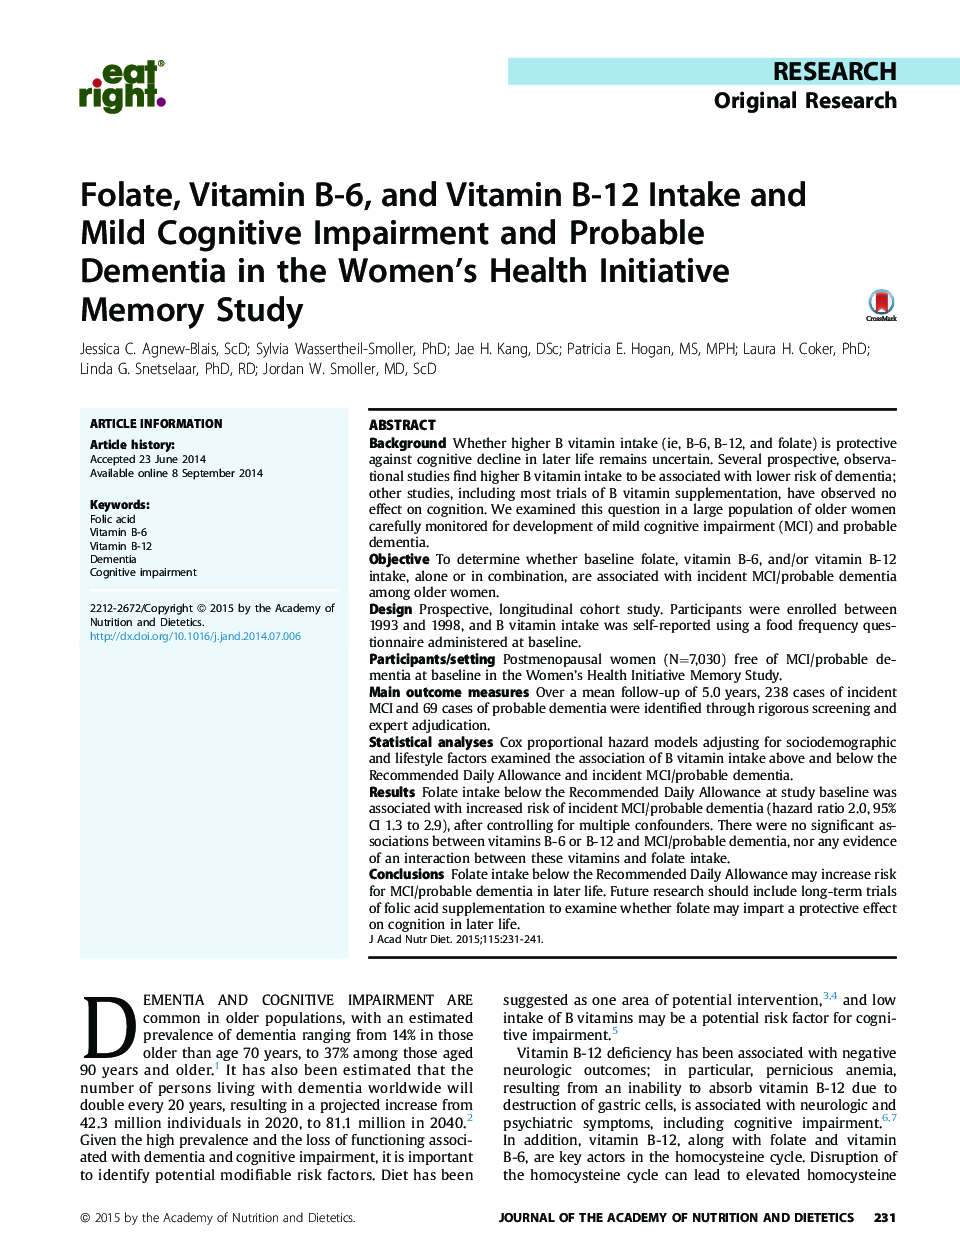 Folate, Vitamin B-6, and Vitamin B-12 Intake and Mild Cognitive Impairment and Probable Dementia in the Women’s Health Initiative Memory Study 